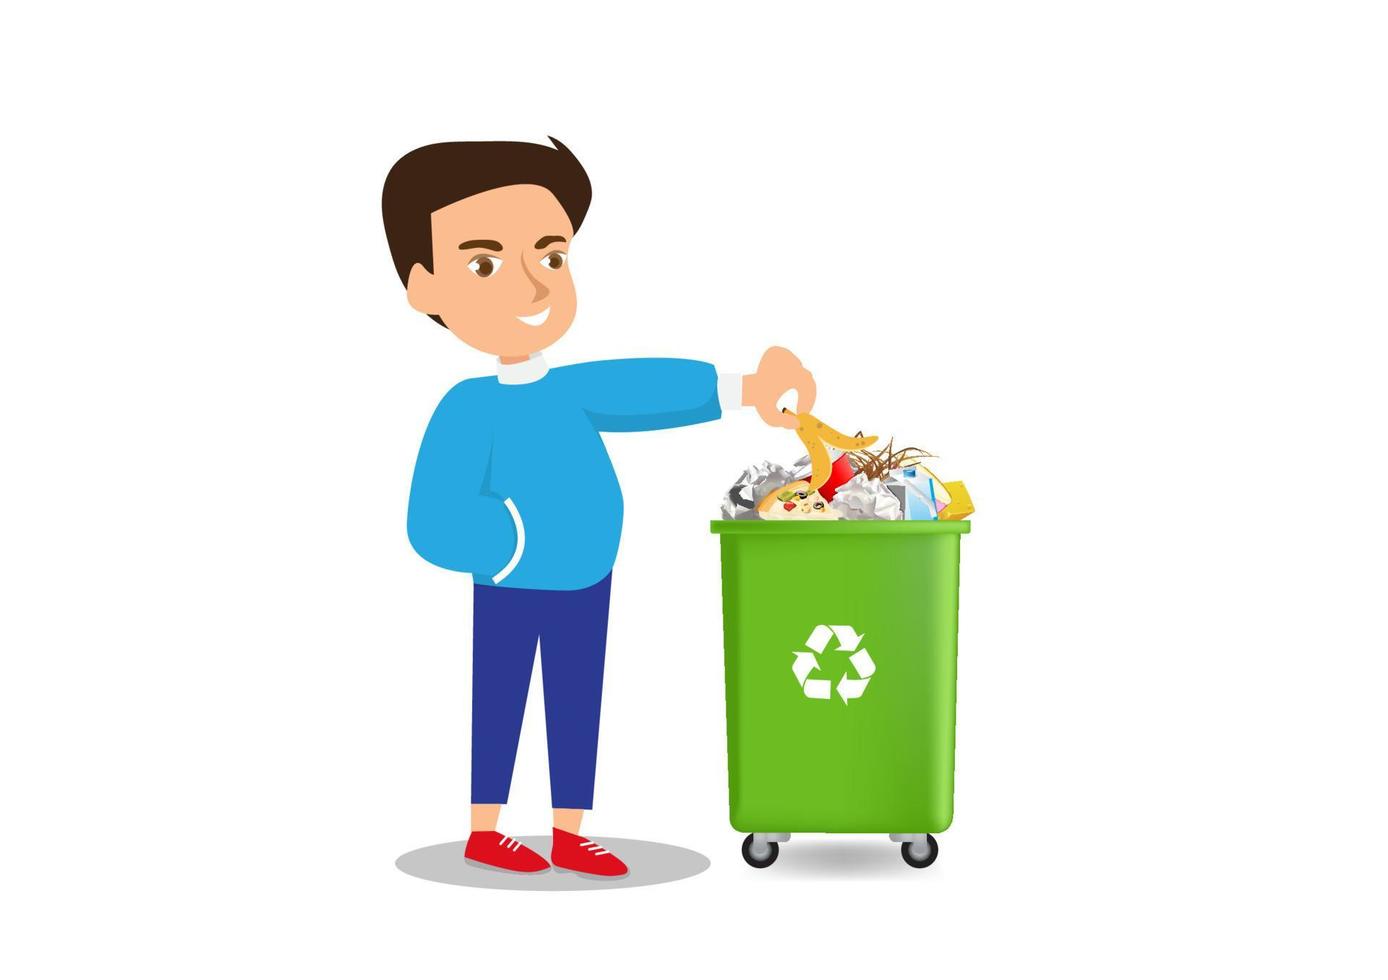 Happy Student Volunteering collects waste and plastic for recycling. Flat style cartoon illustration vector